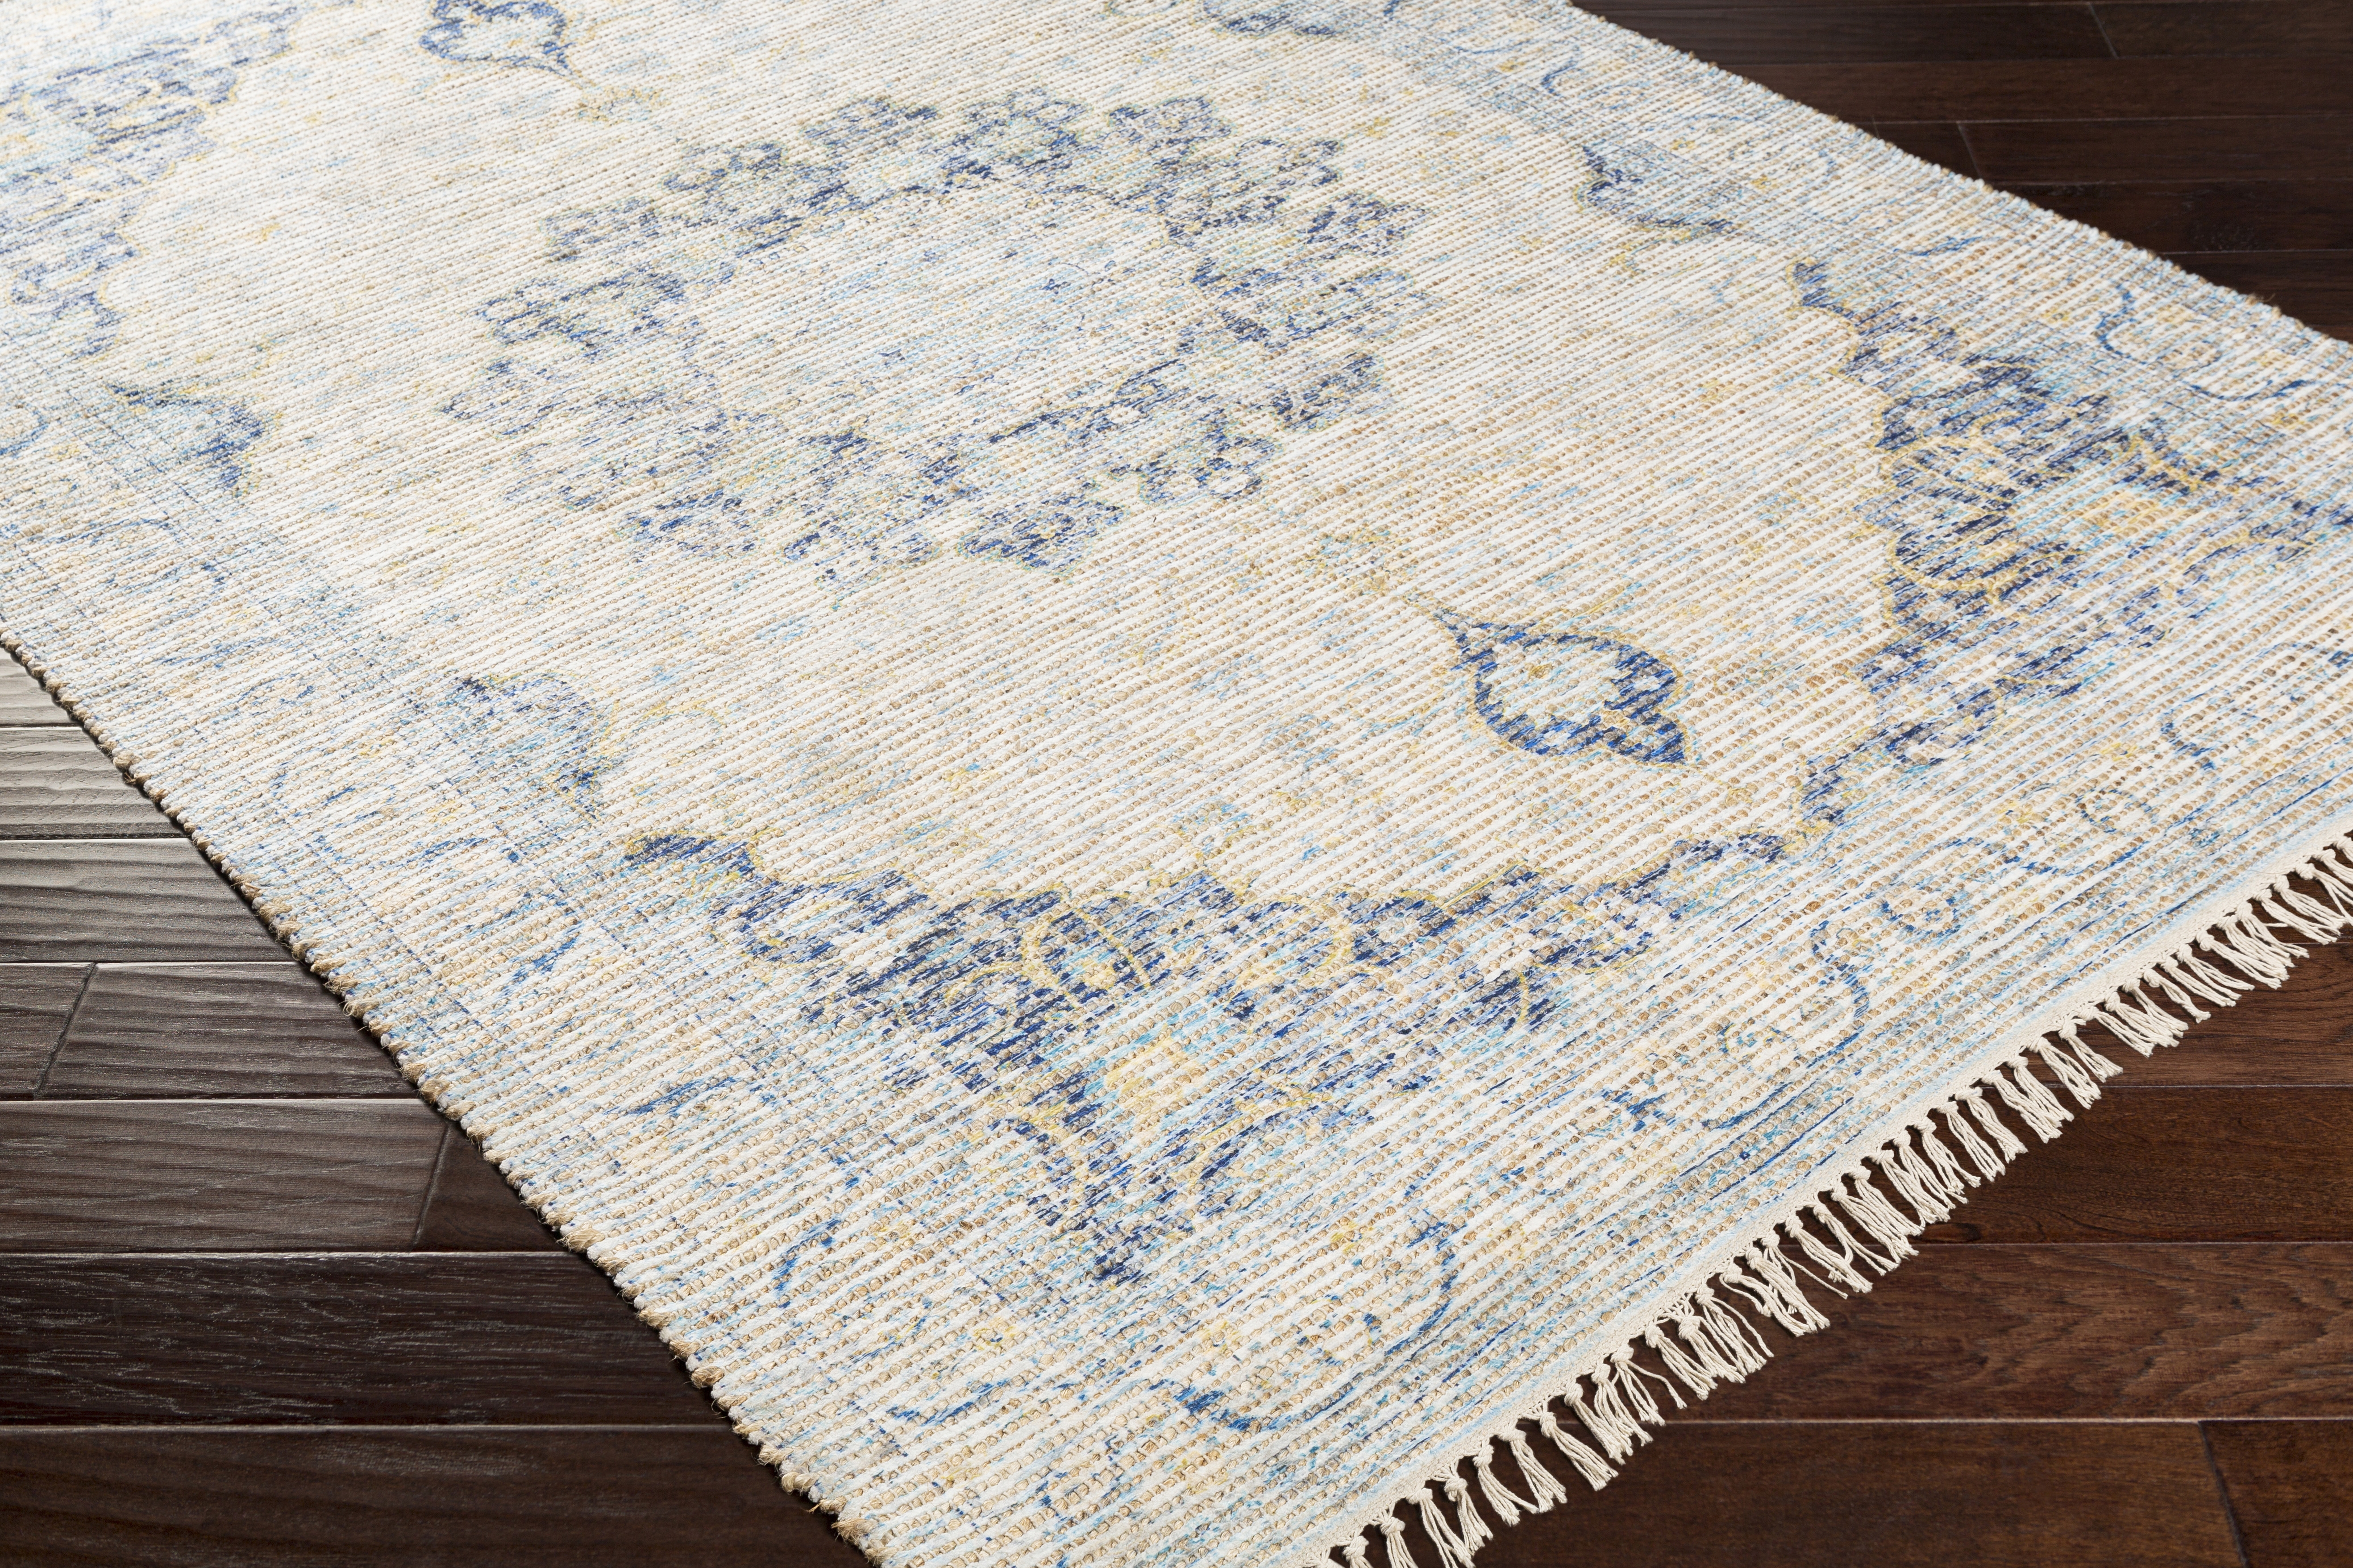 Coventry Rug, 8' x 10' - Image 3